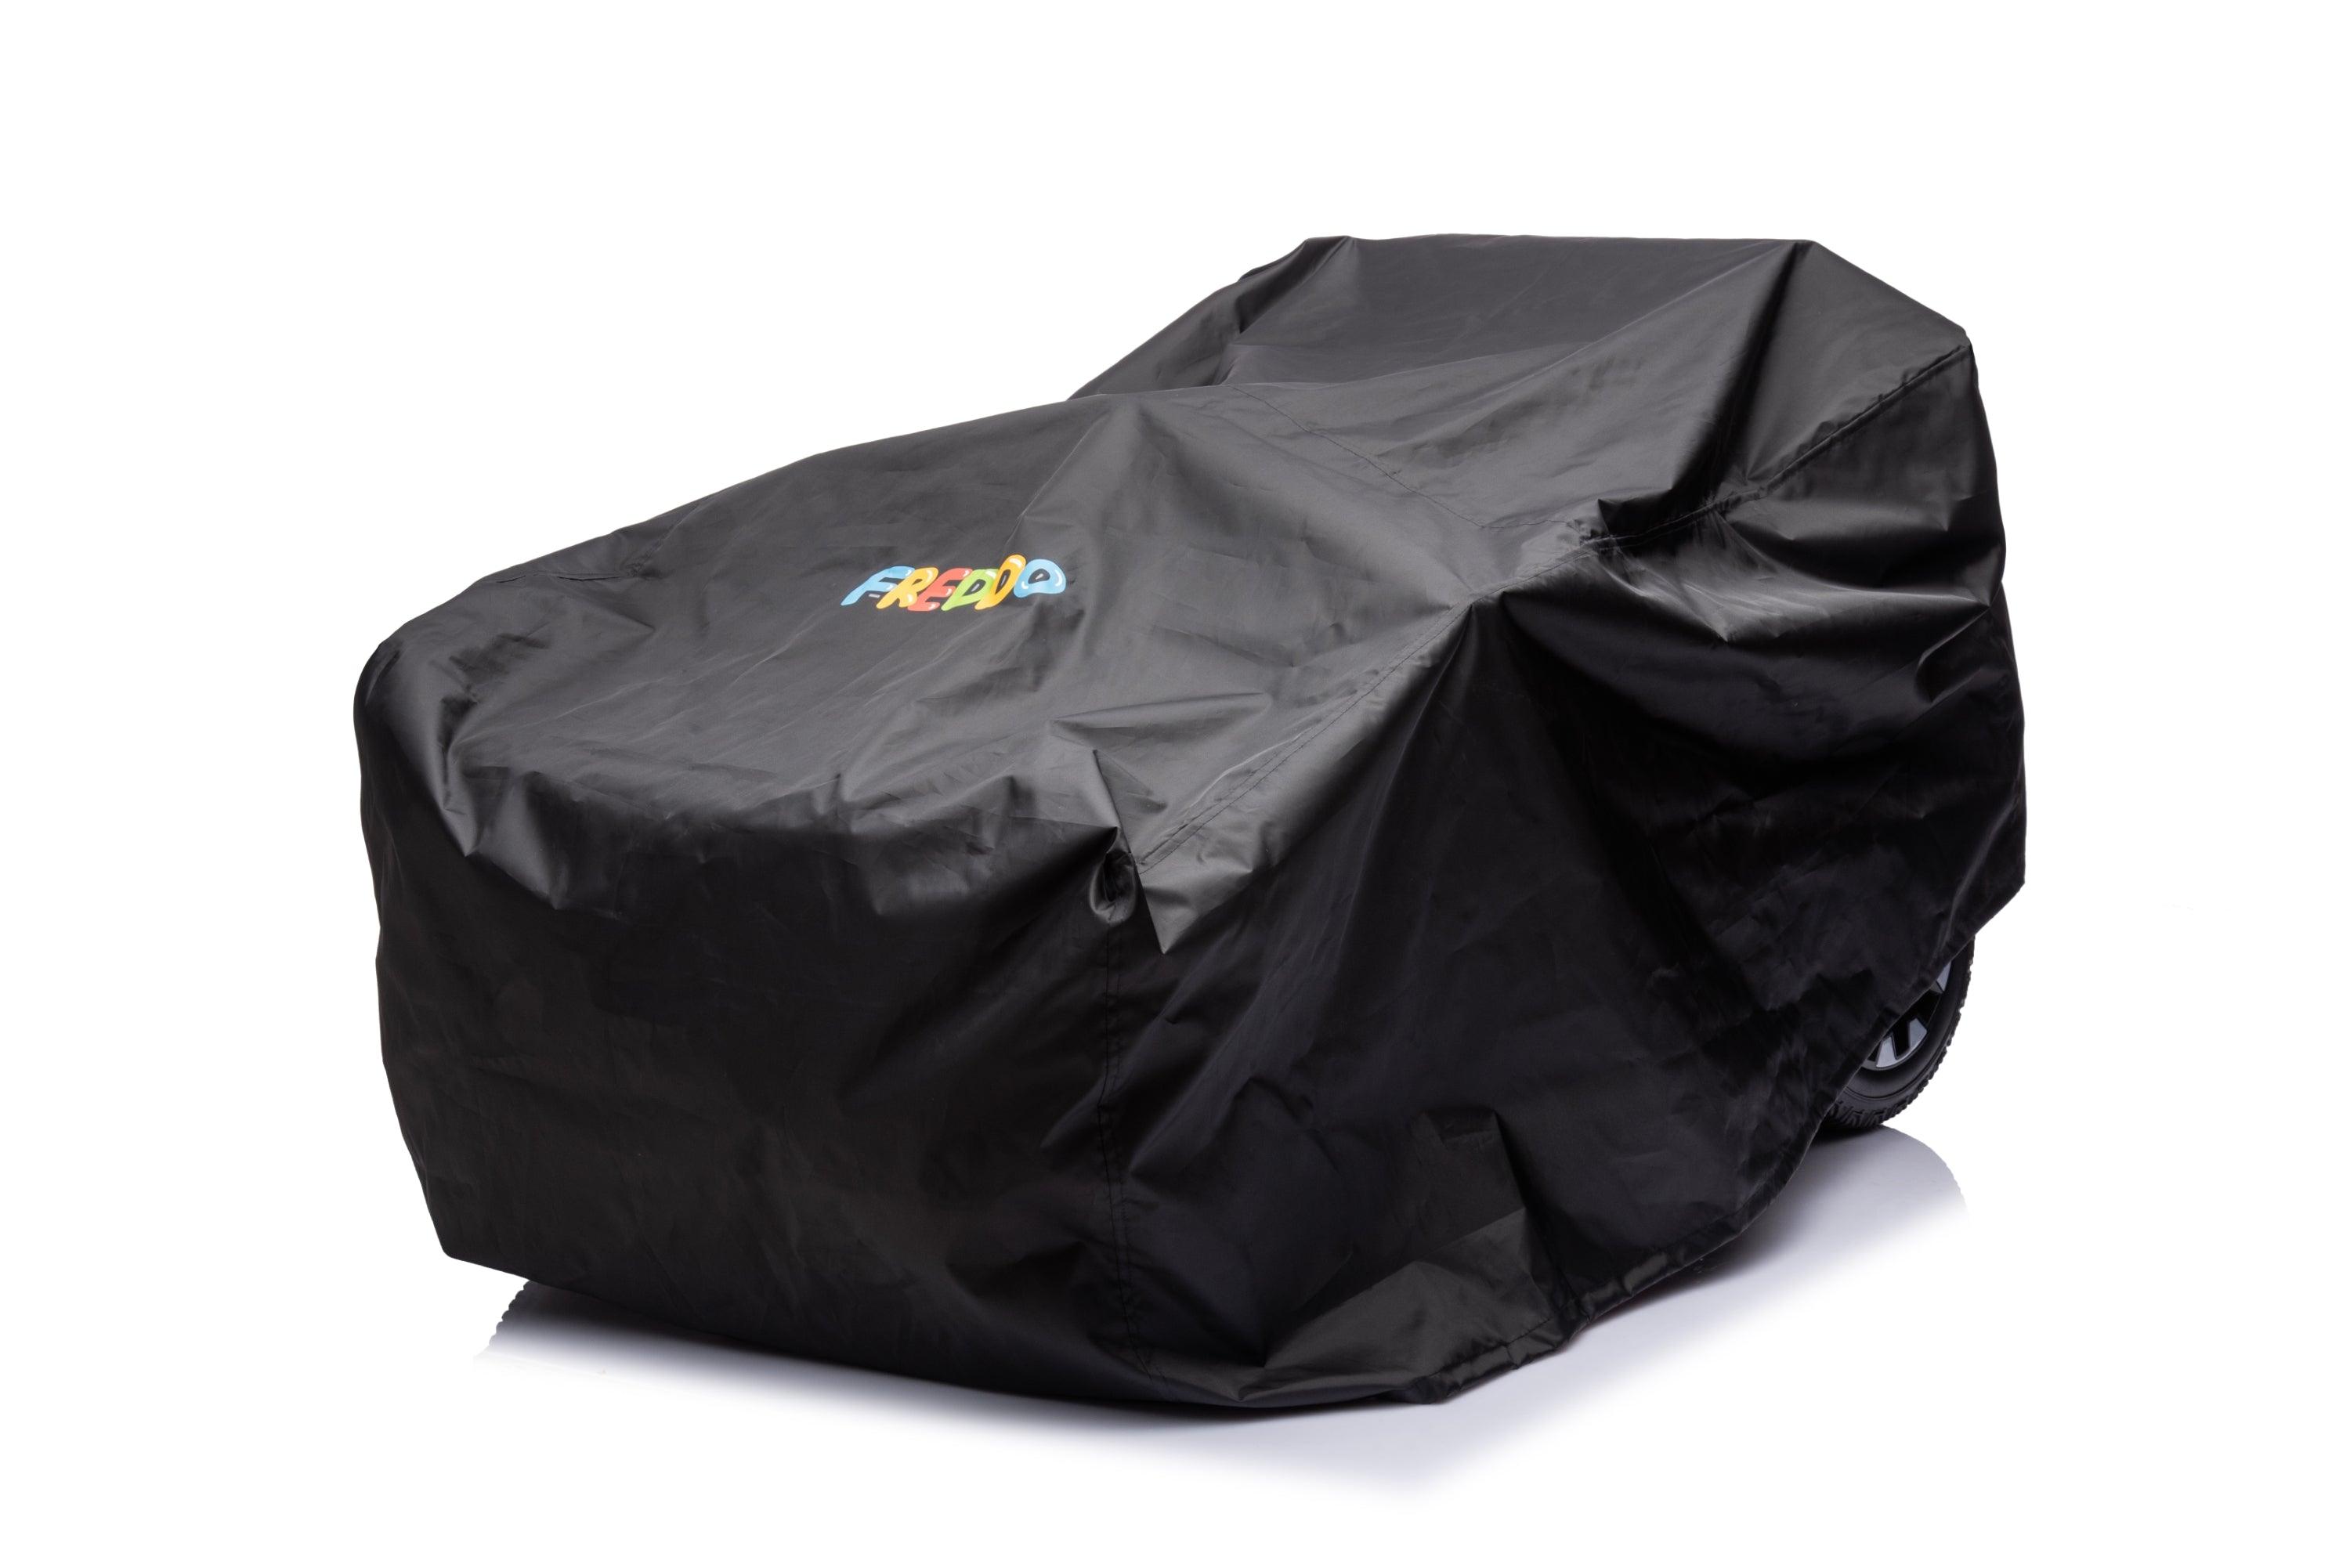 Ride on car Covers. A shield against rain, sun, dust, snow, and leaves - DTI Direct USA